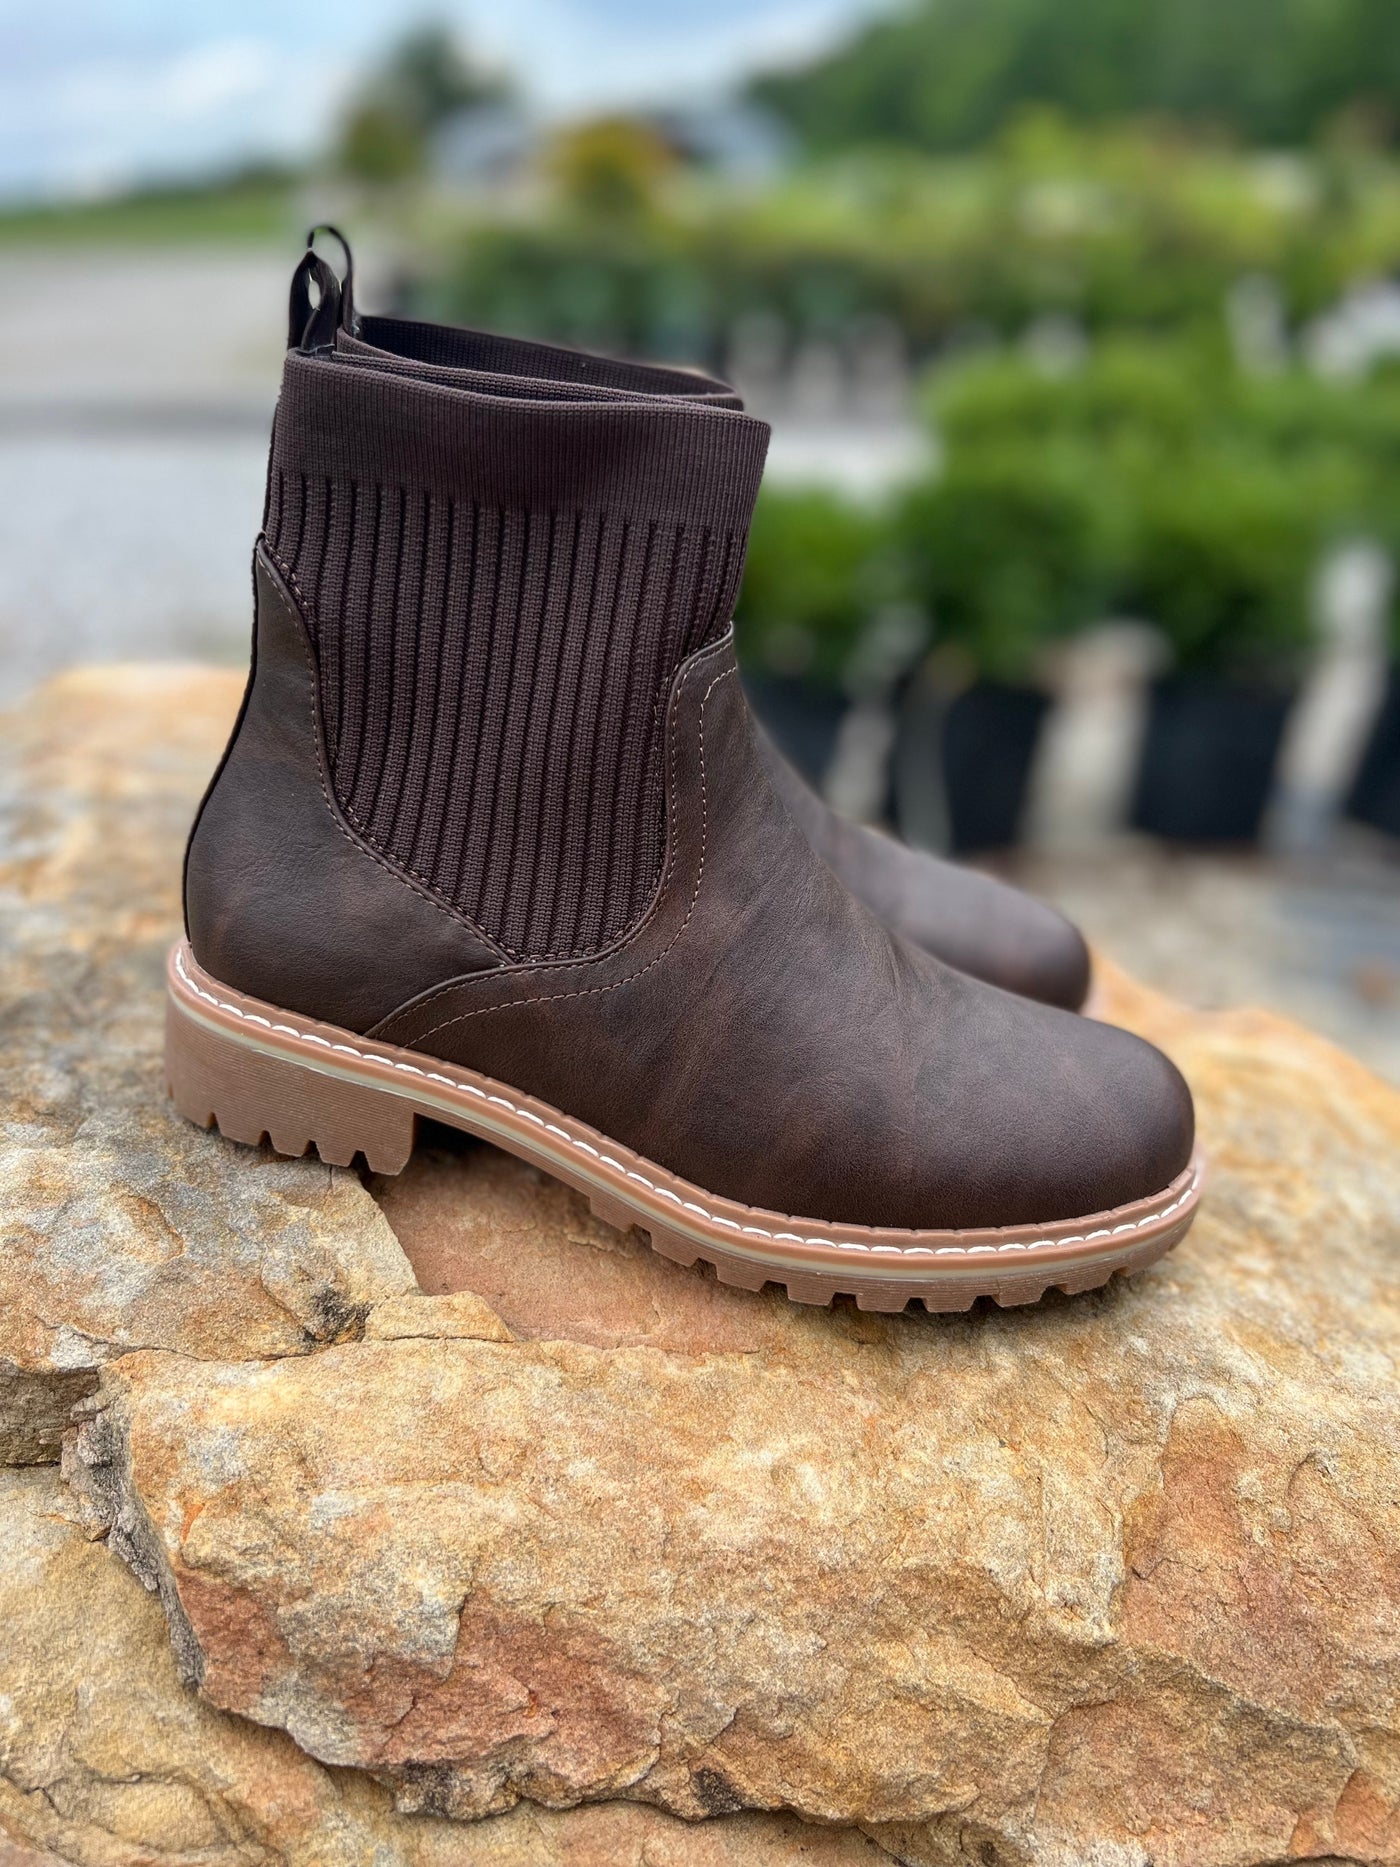 Corkys Cabin Fever Boots in Brown Final Sale